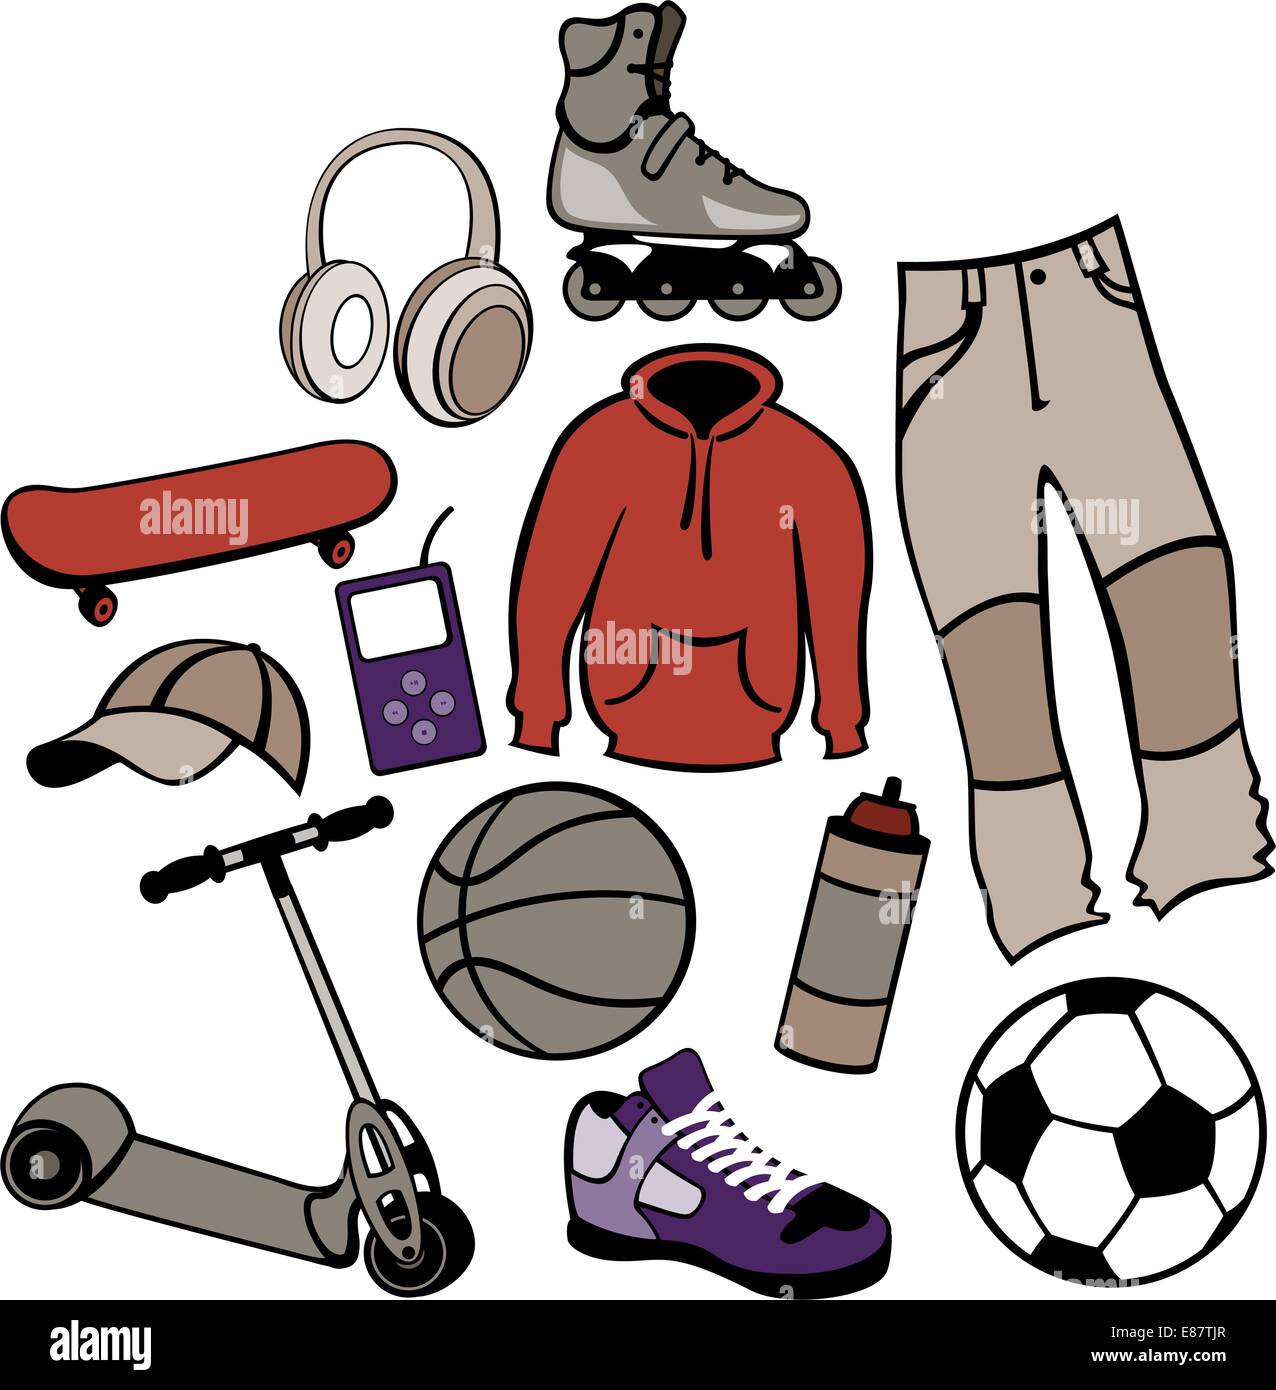 Vector illustration of man accessories set related to urban life style. Stock Vector